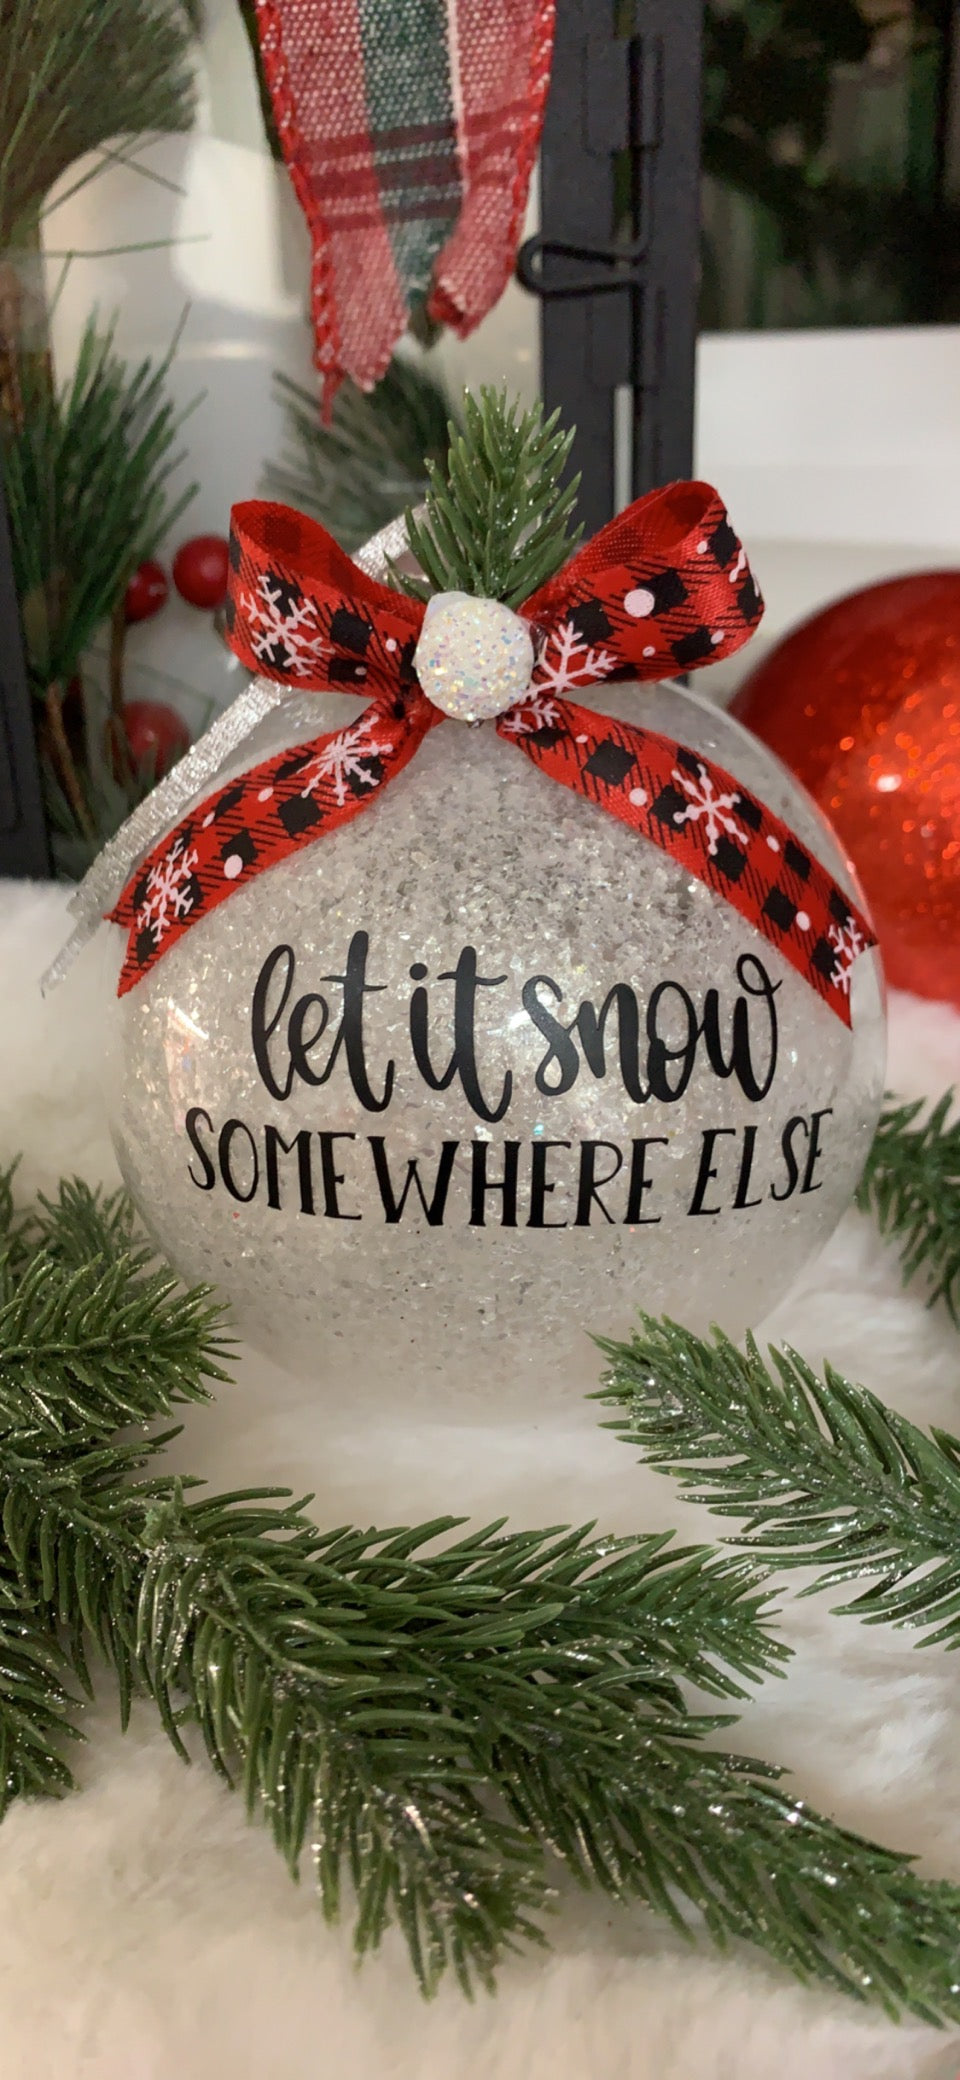 Icy snow vibe glitter ornament. But what do we call it…